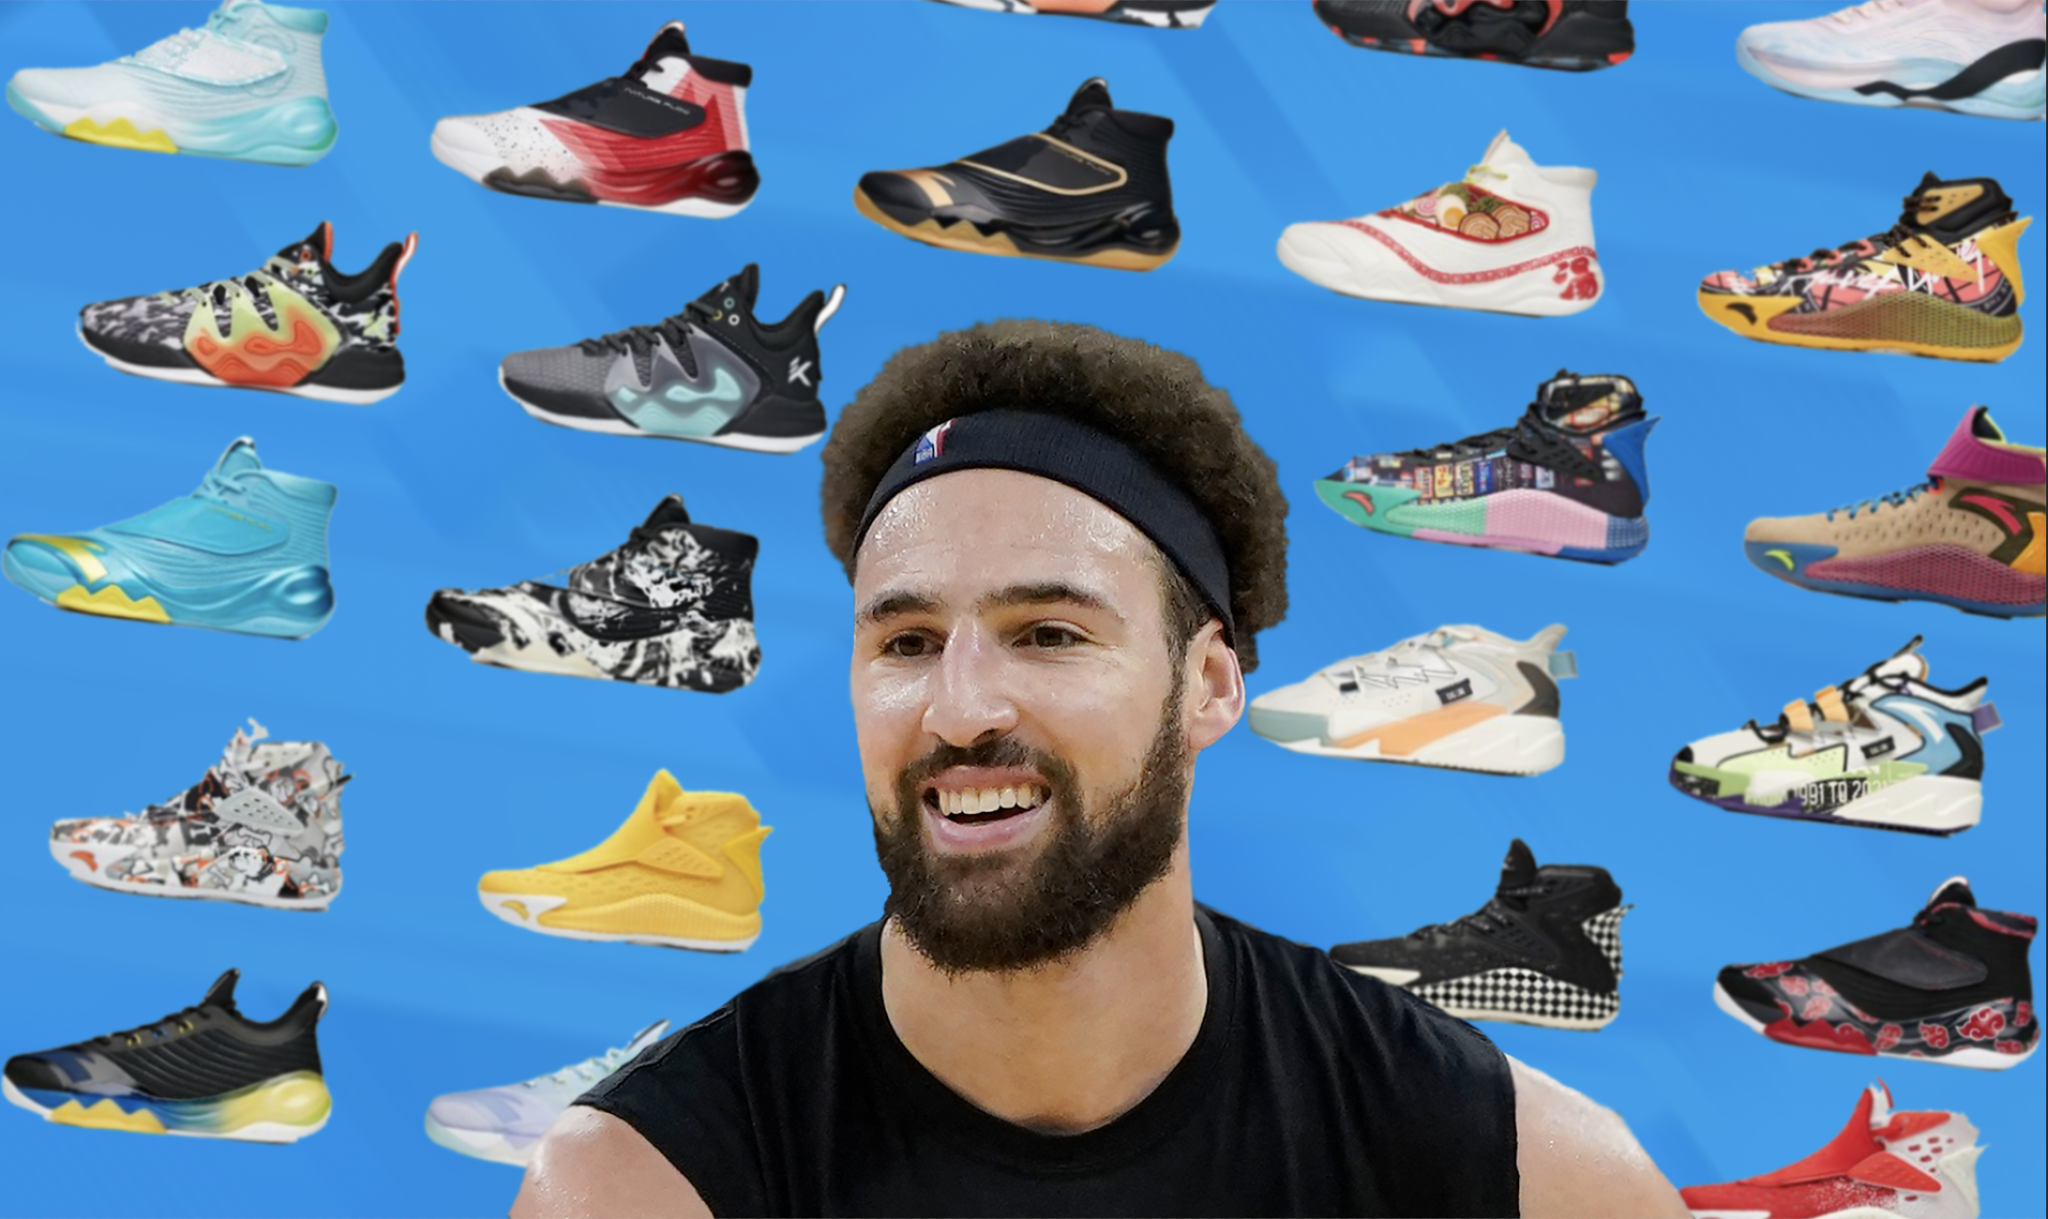 Two-Minute Drill 1-11-2022: Here's why Klay Thompson's Anta signature shoes  are still impossible to find